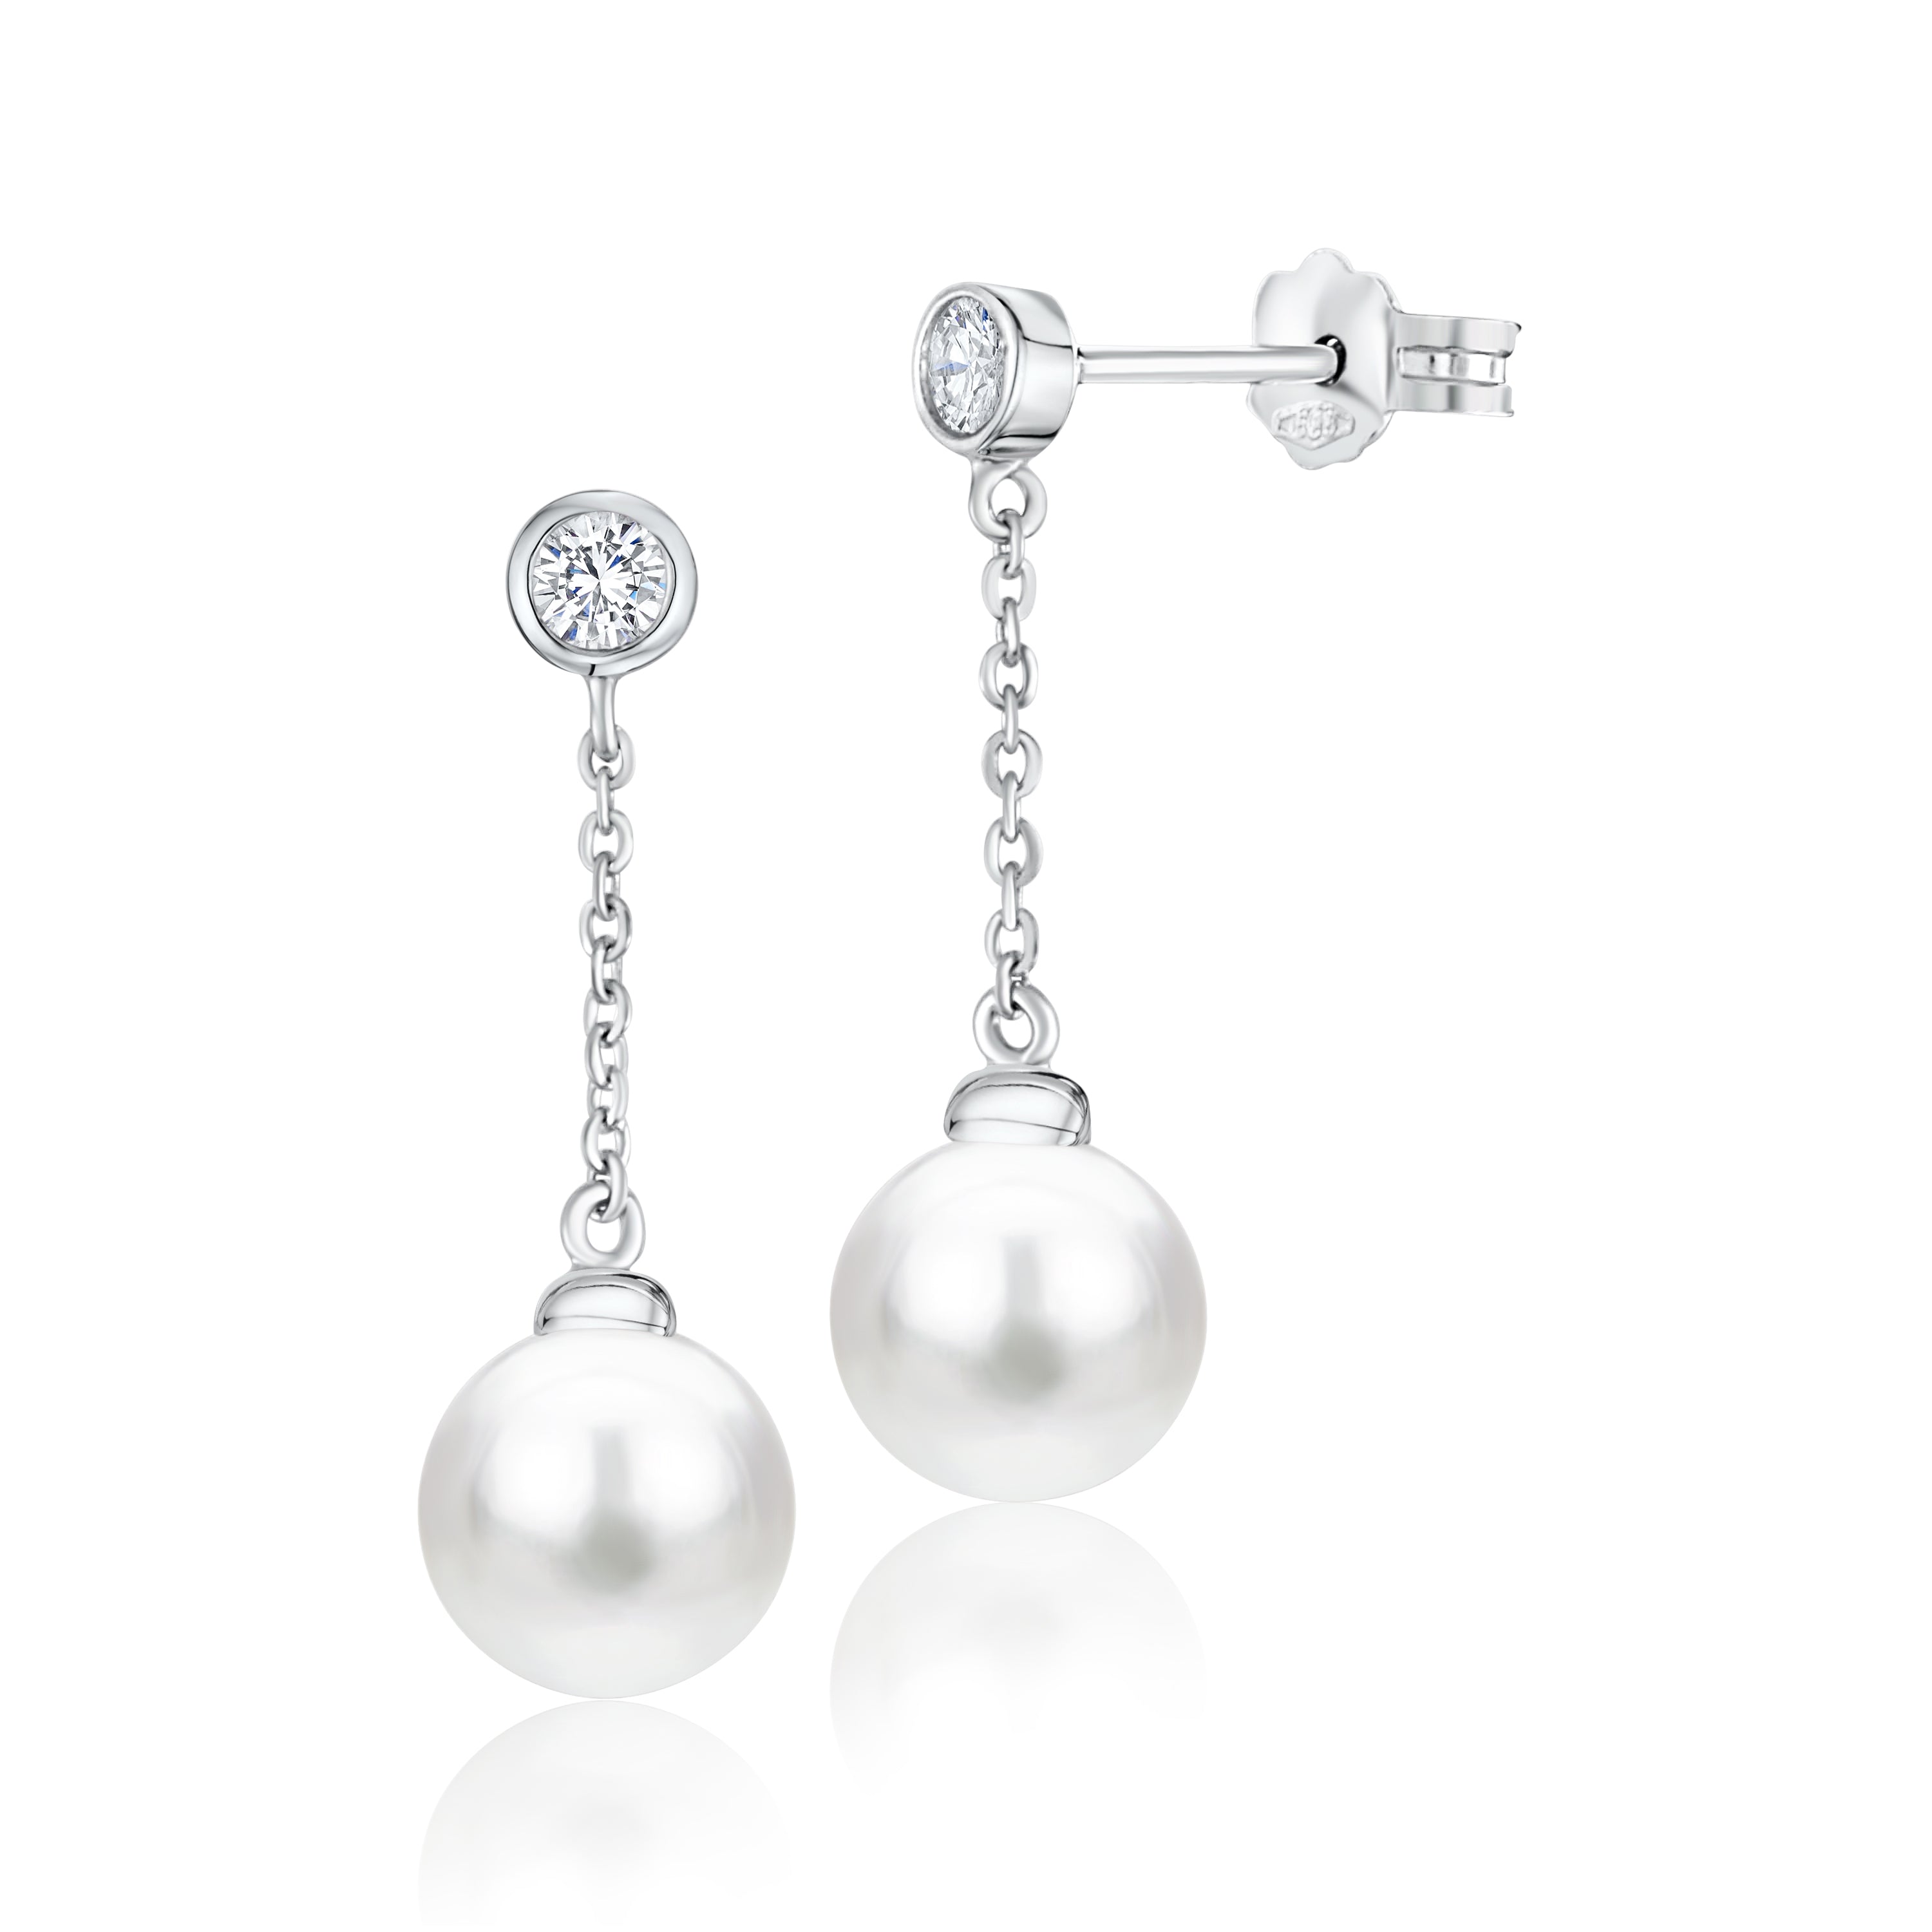 UNICORNJ 14K White Gold Freshwater Cultured Pearl Drop Dangle Earrings with Bezel Set Simulated Diamond CZ 7.5mm Italy